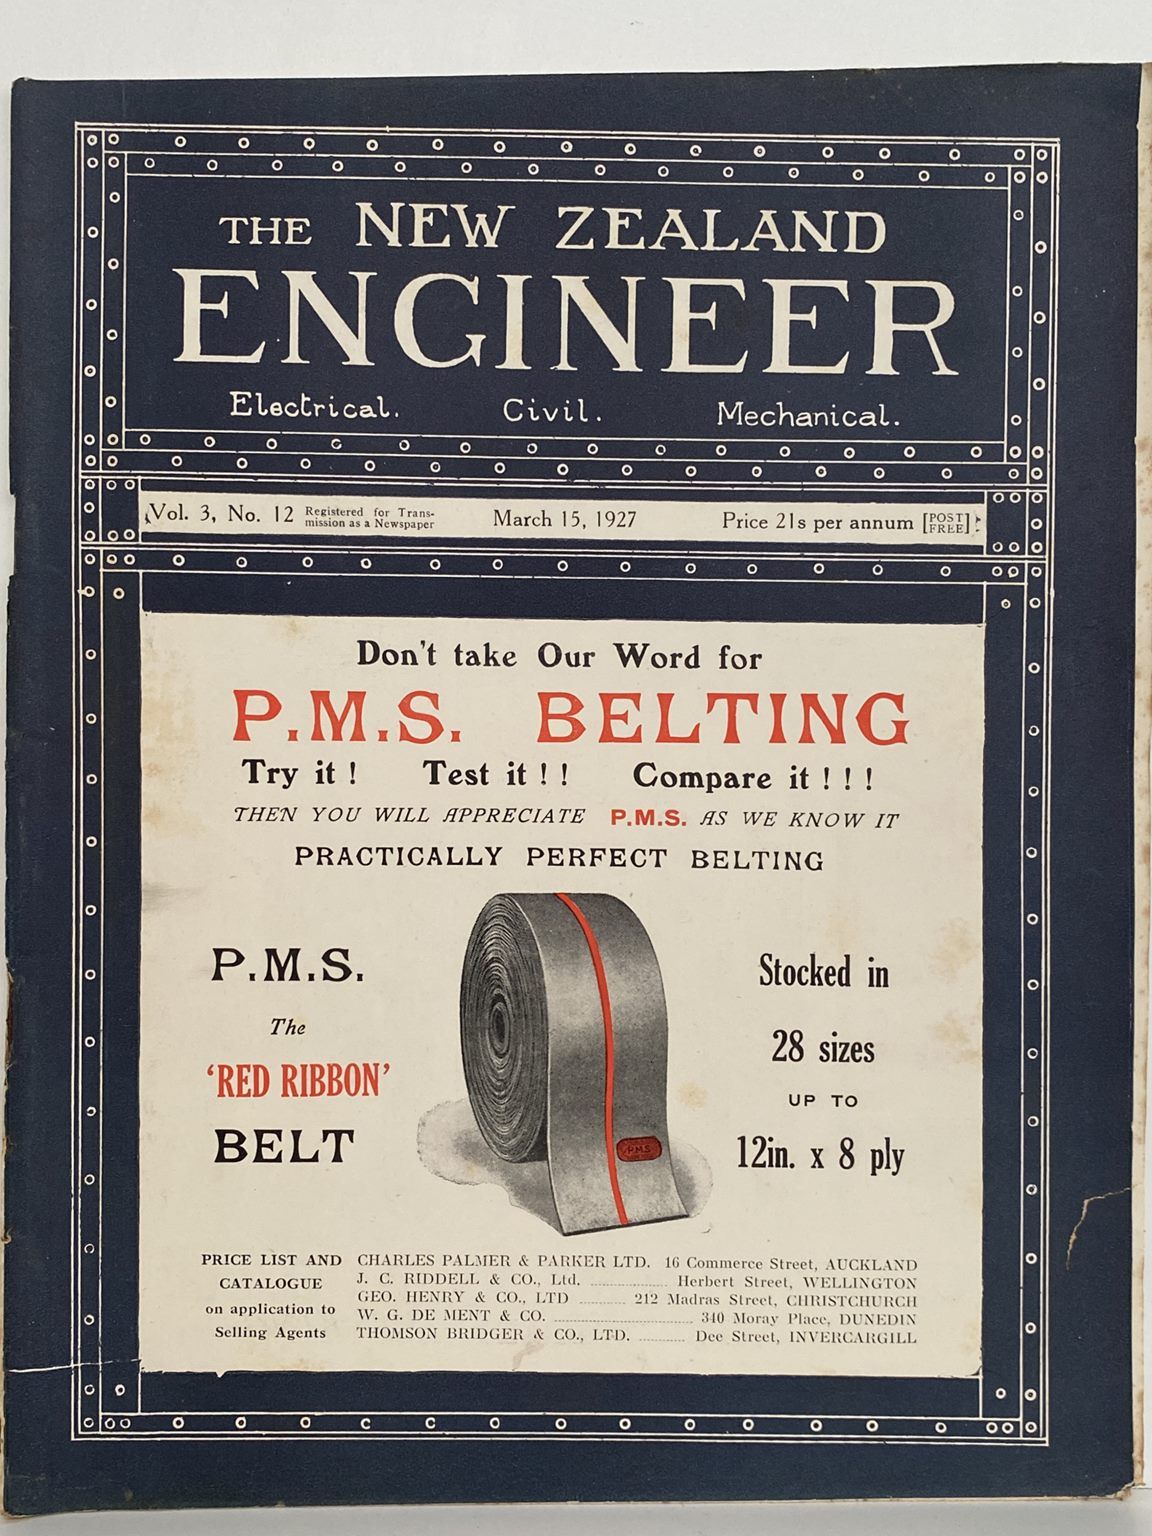 OLD MAGAZINE: The New Zealand Engineer Vol. 3, No. 12 - 15 March 1927